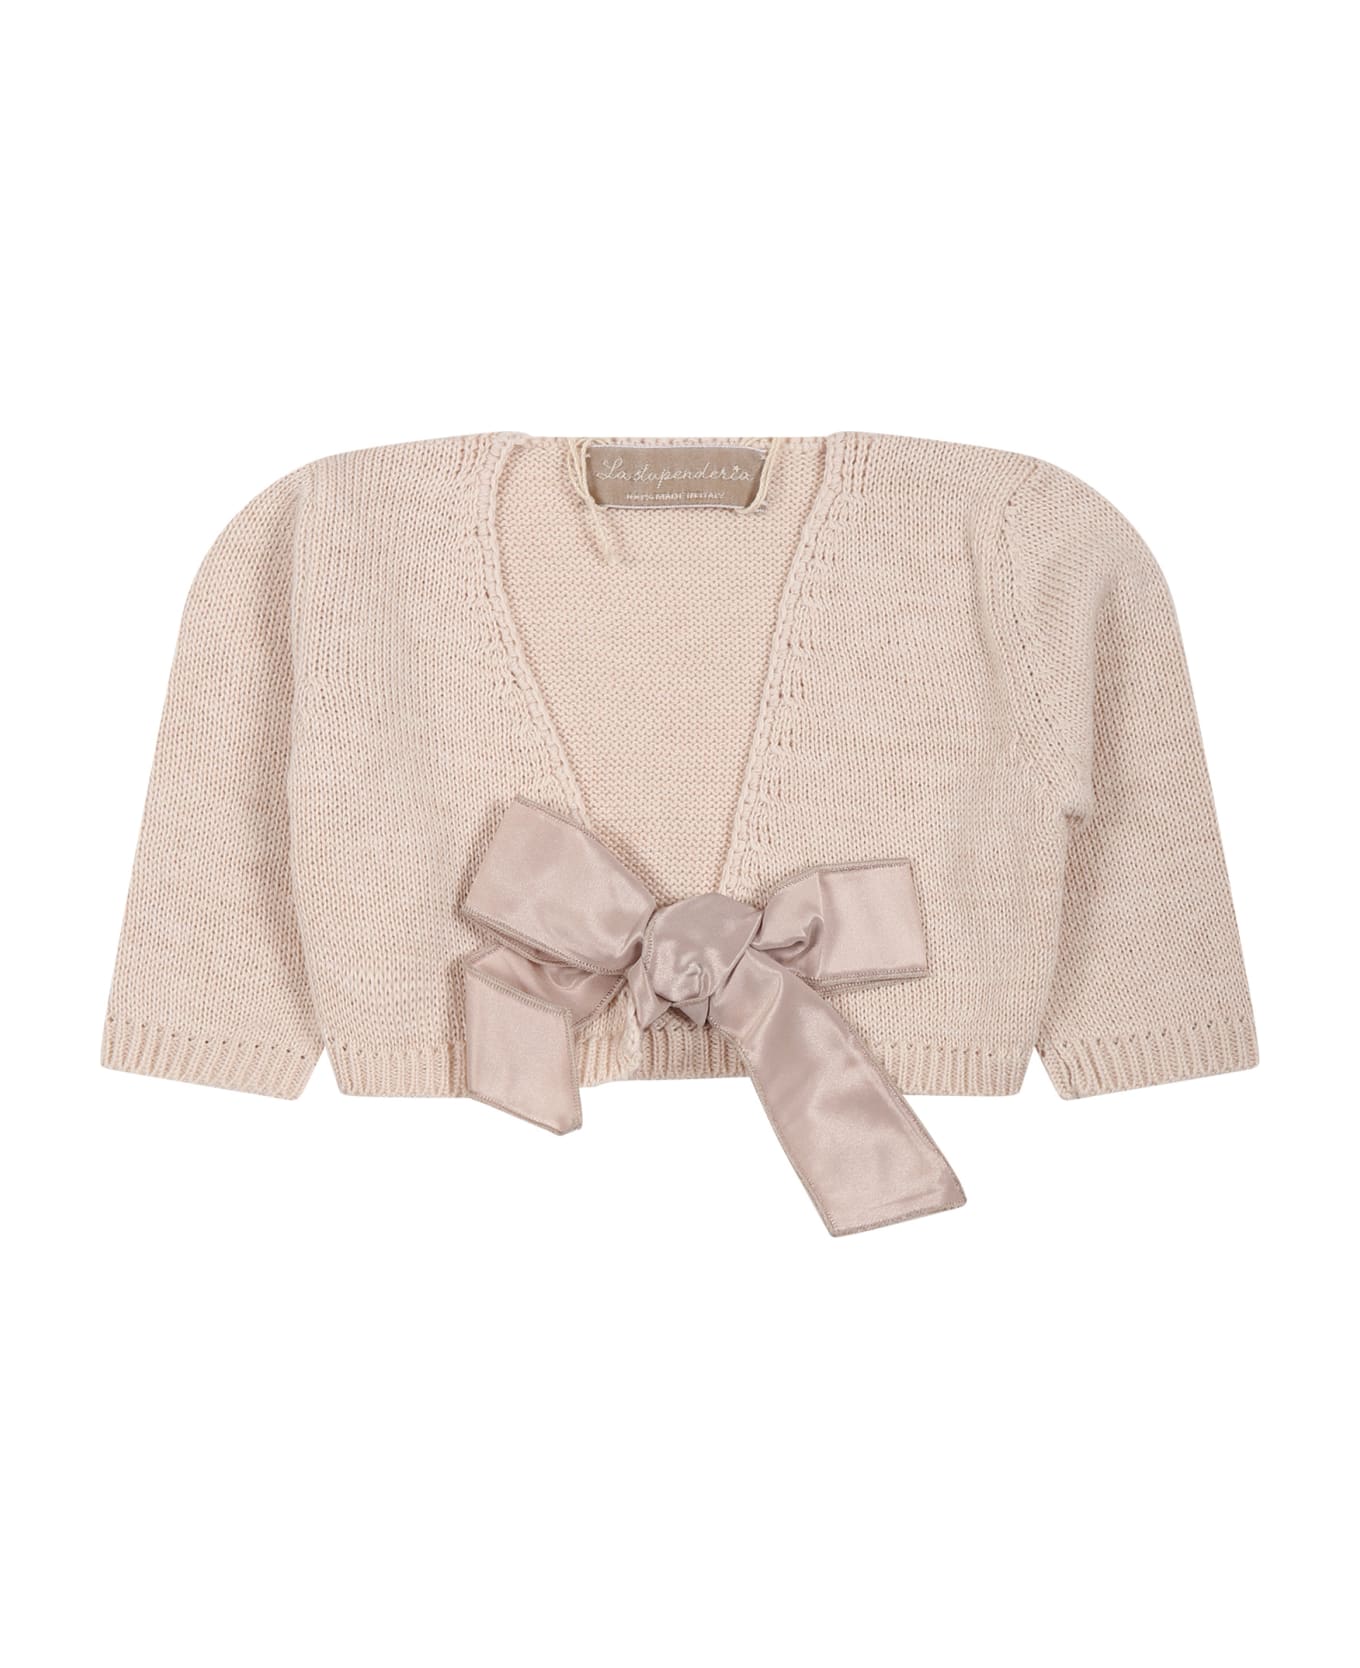 La stupenderia Pink Cardigan For Baby Girl - Pink